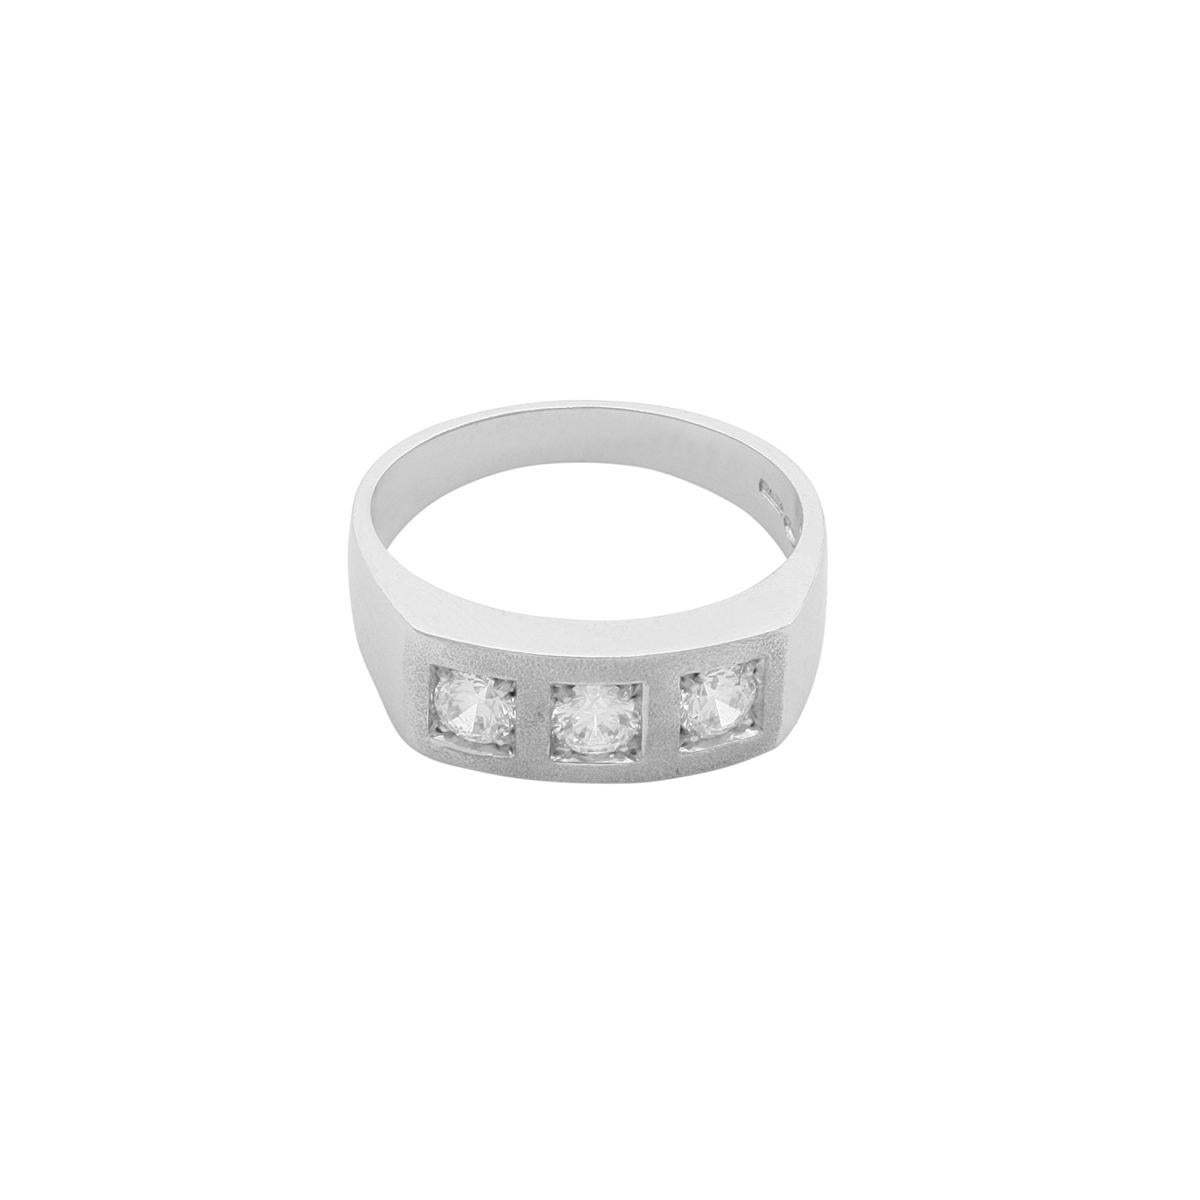 This innovative, squared trilogy ring is crafted in platinum with a matt finish. It features three white diamonds in a bright-cut setting. Representing the past, present, and future, trilogy rings have the ability to tell the story of your journey